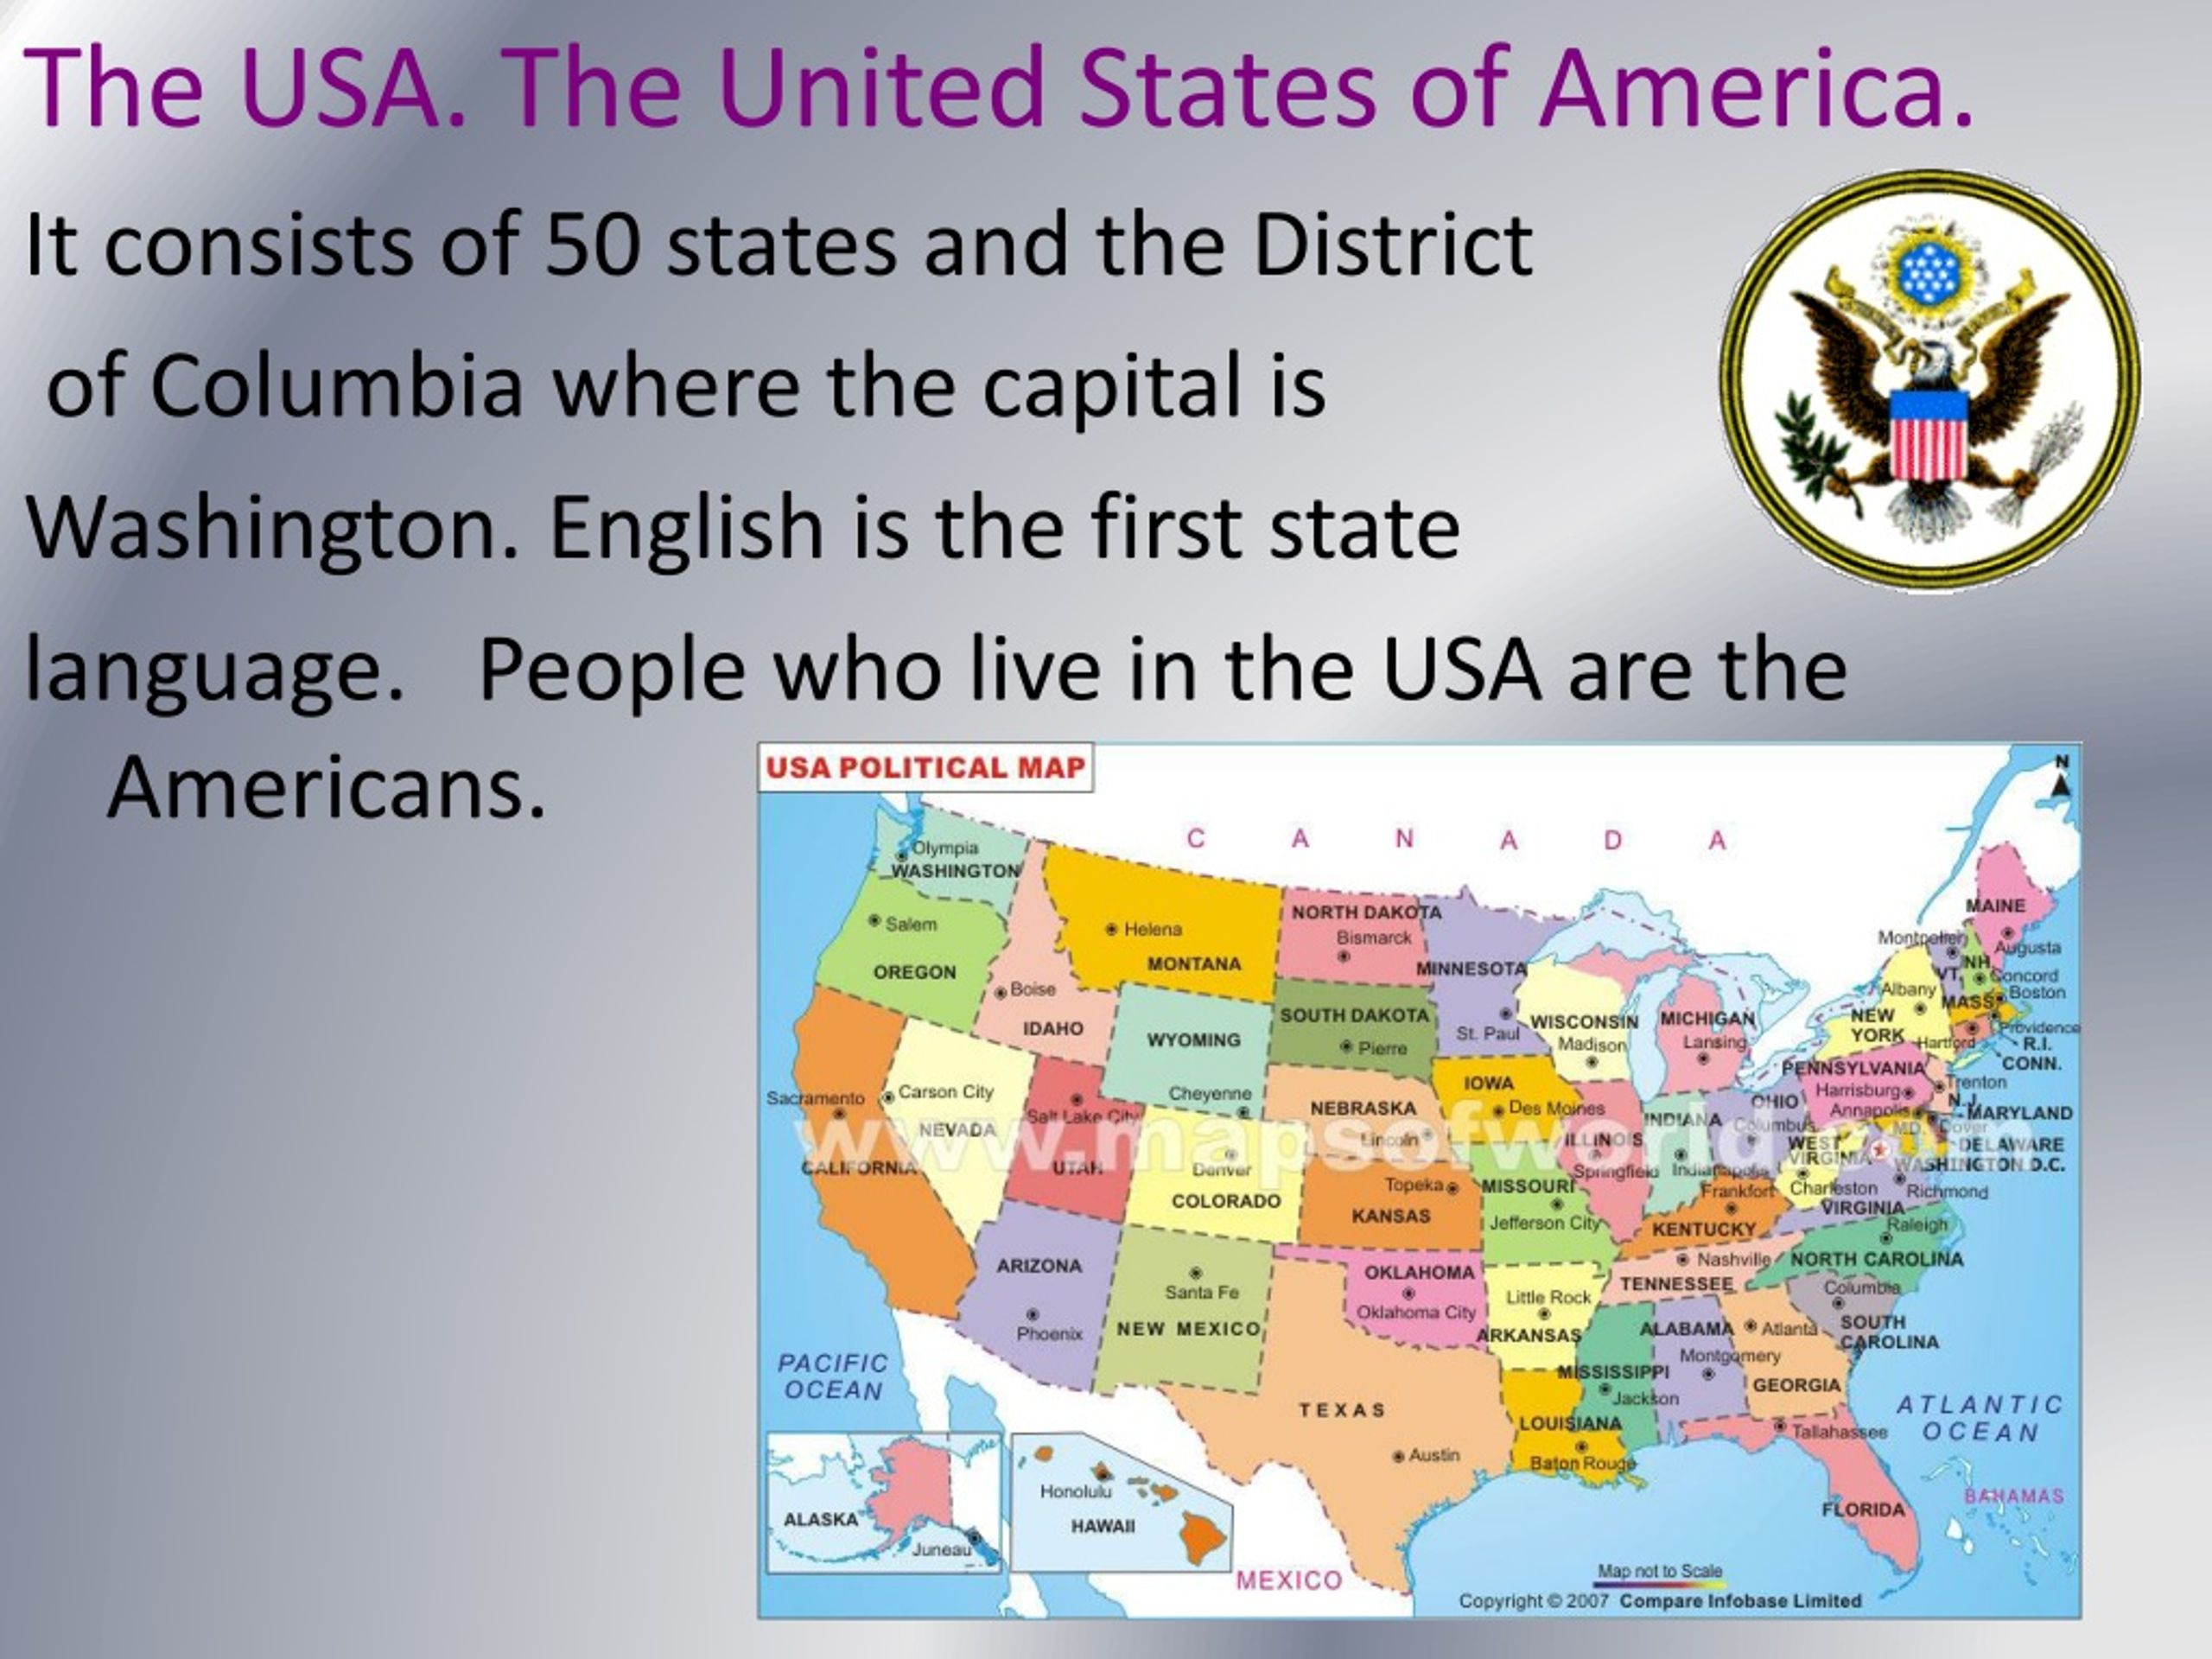 Consists of the first. The United States of America текст. The USA consists of. Languages and Countries презентация. English speaking Countries презентация.